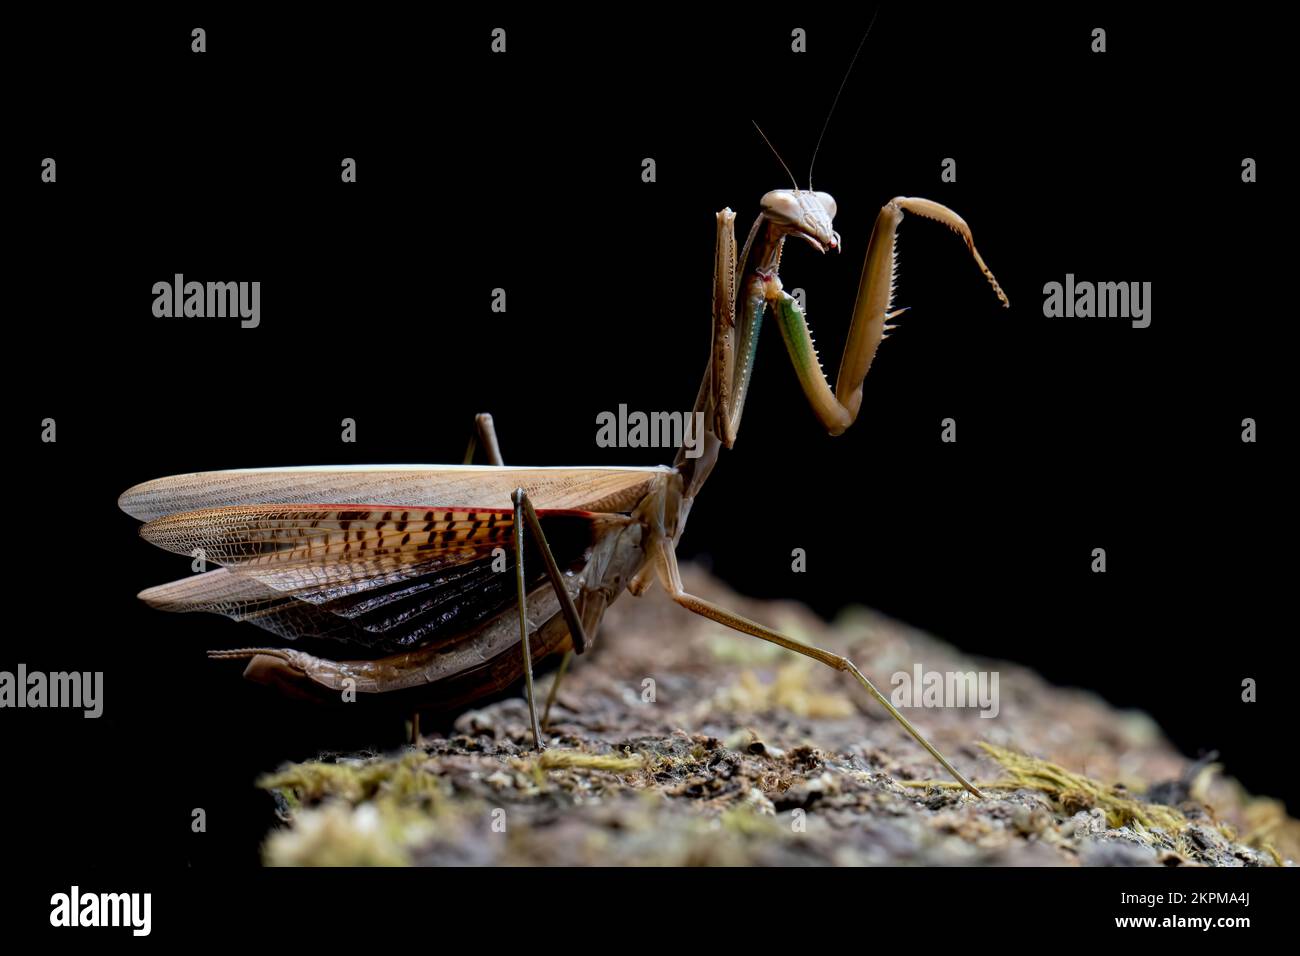 Close-Up of a Chinese mantis rearing up, Indonesia Stock Photo